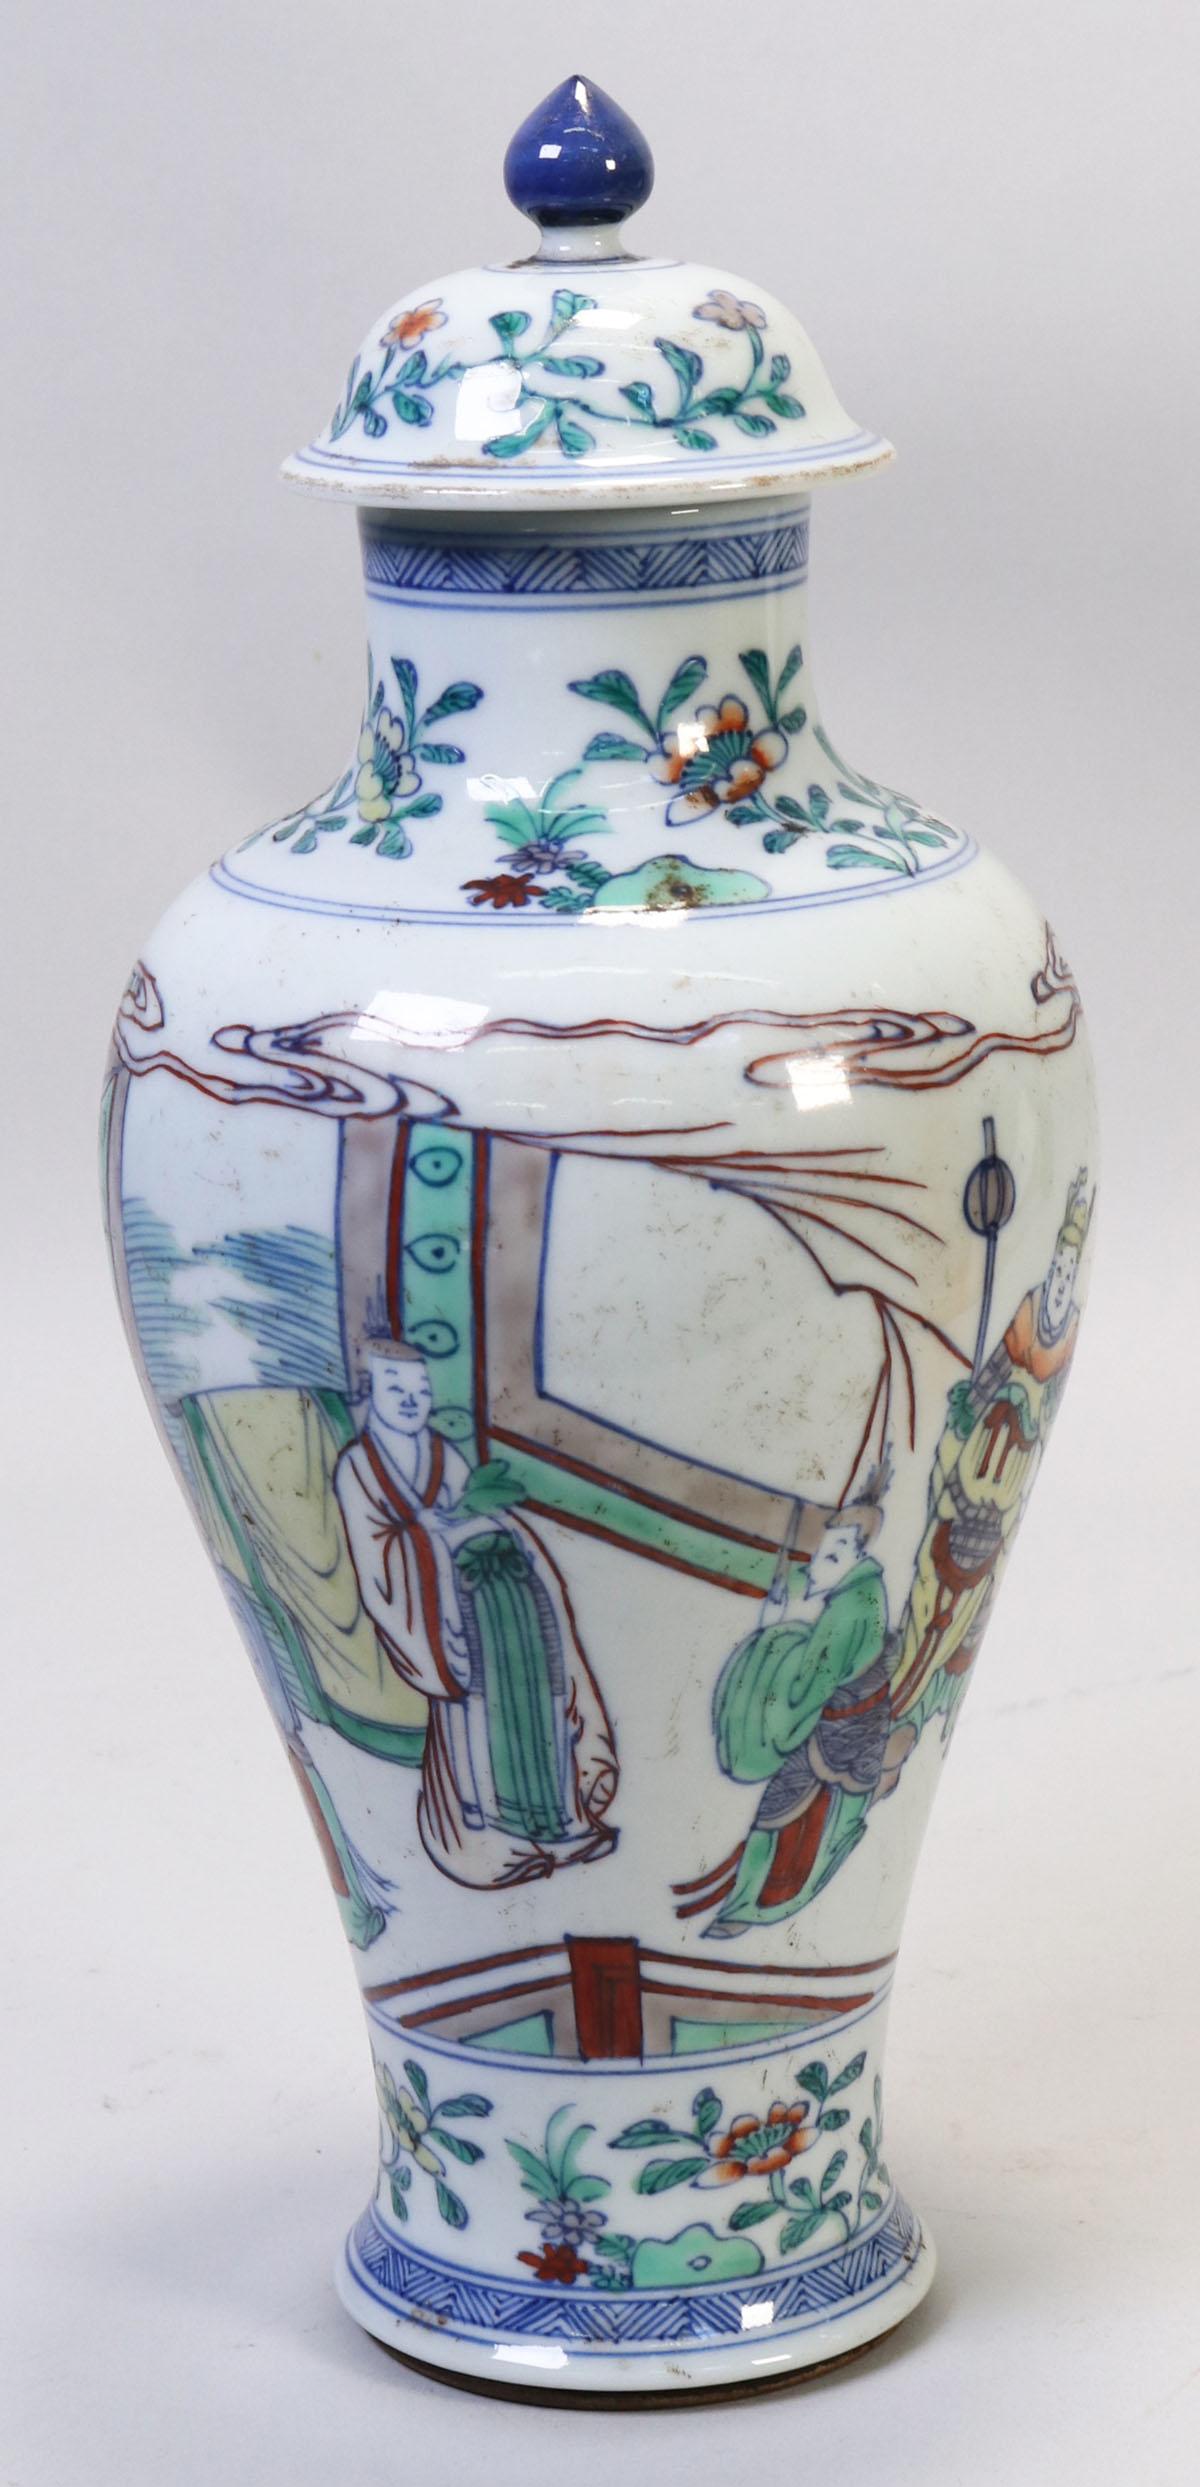 Chinese Doucai Covered Vase